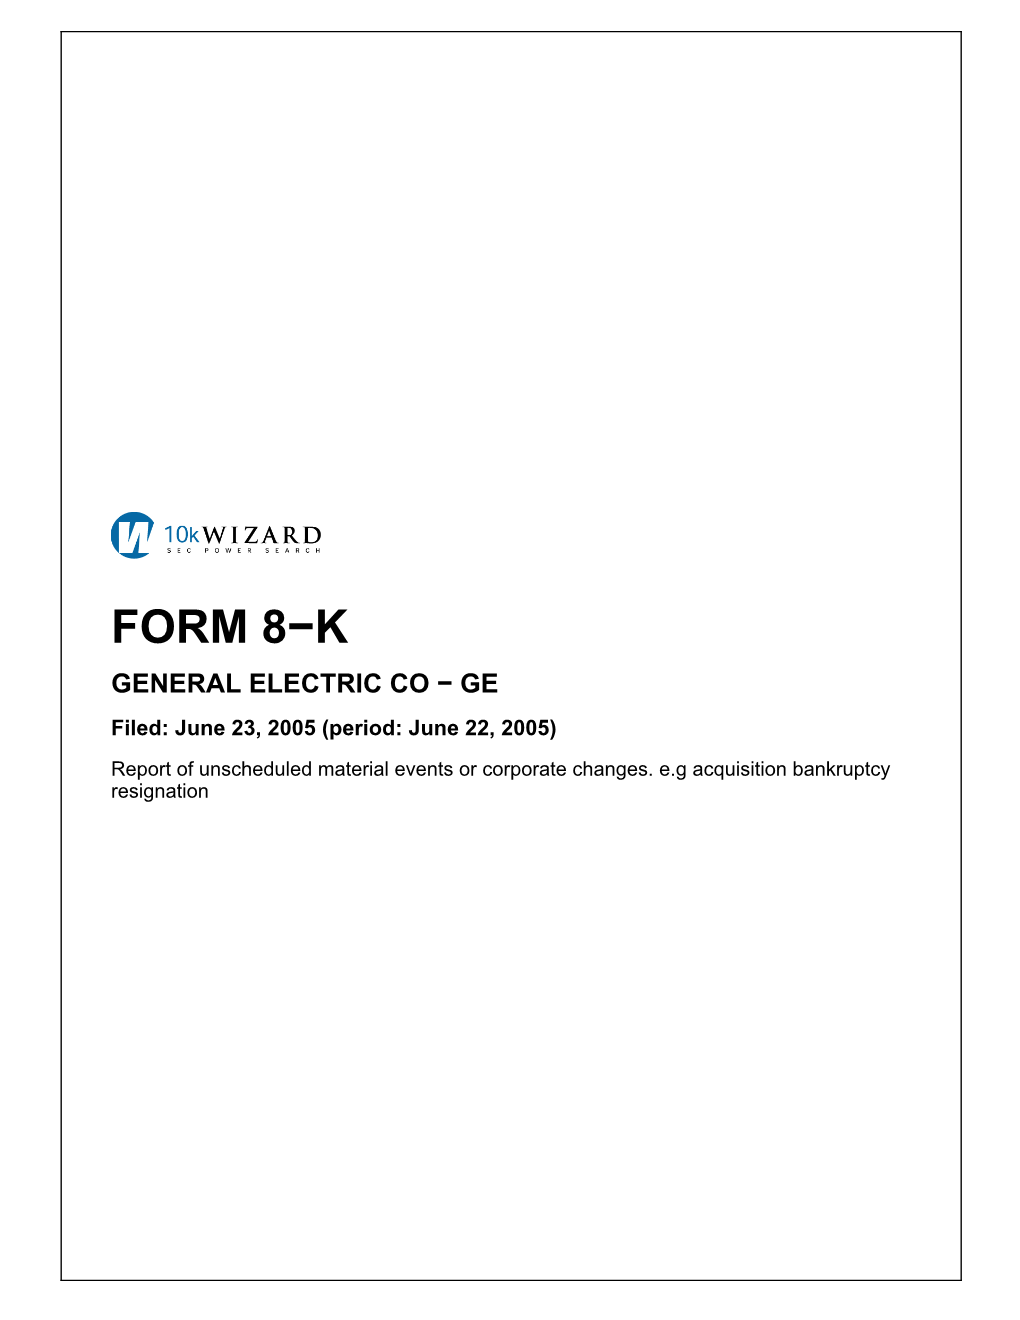 FORM 8−K GENERAL ELECTRIC CO − GE Filed: June 23, 2005 (Period: June 22, 2005)